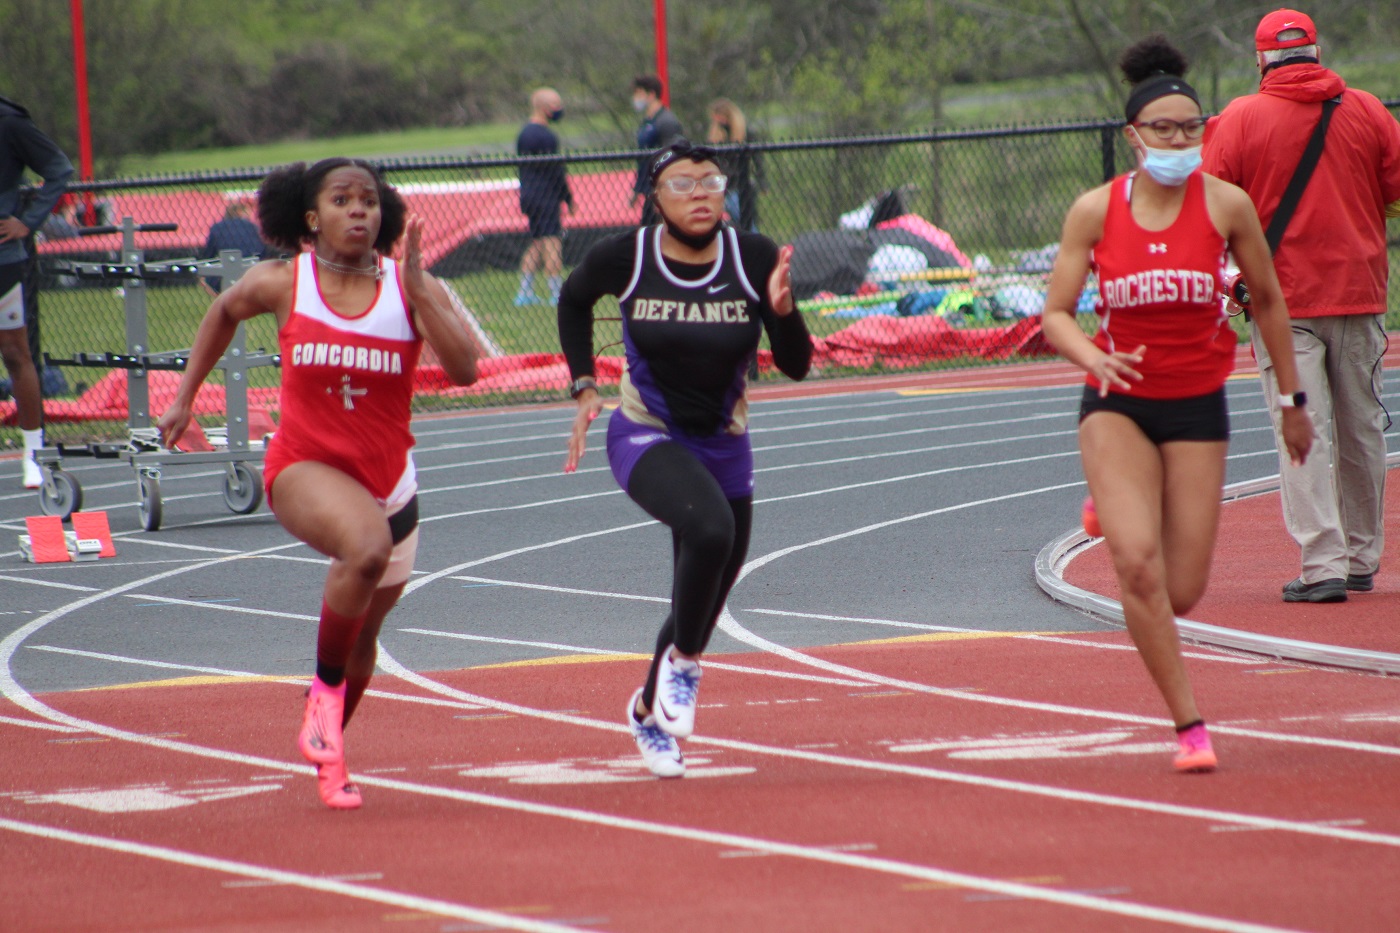 Mae Dulin took 2nd place in the 100m dash